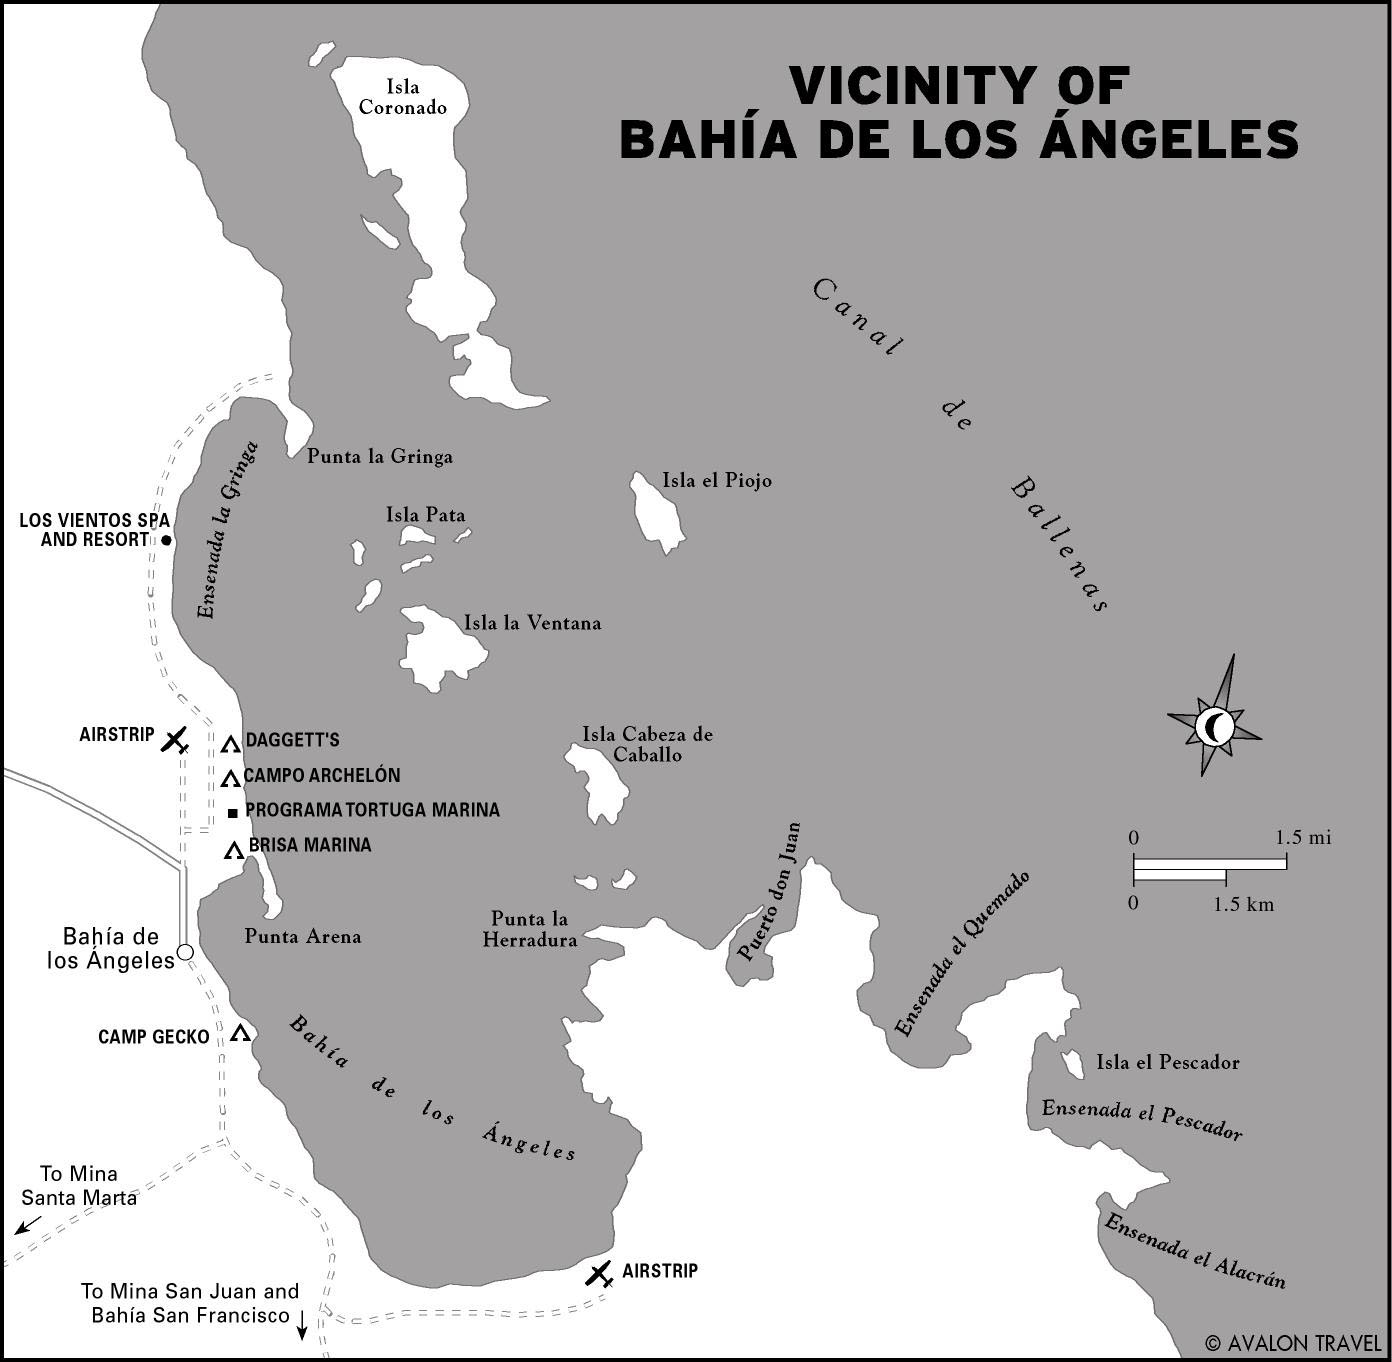 Map of the Vicinity of Bahia de los Angeles in Mexico